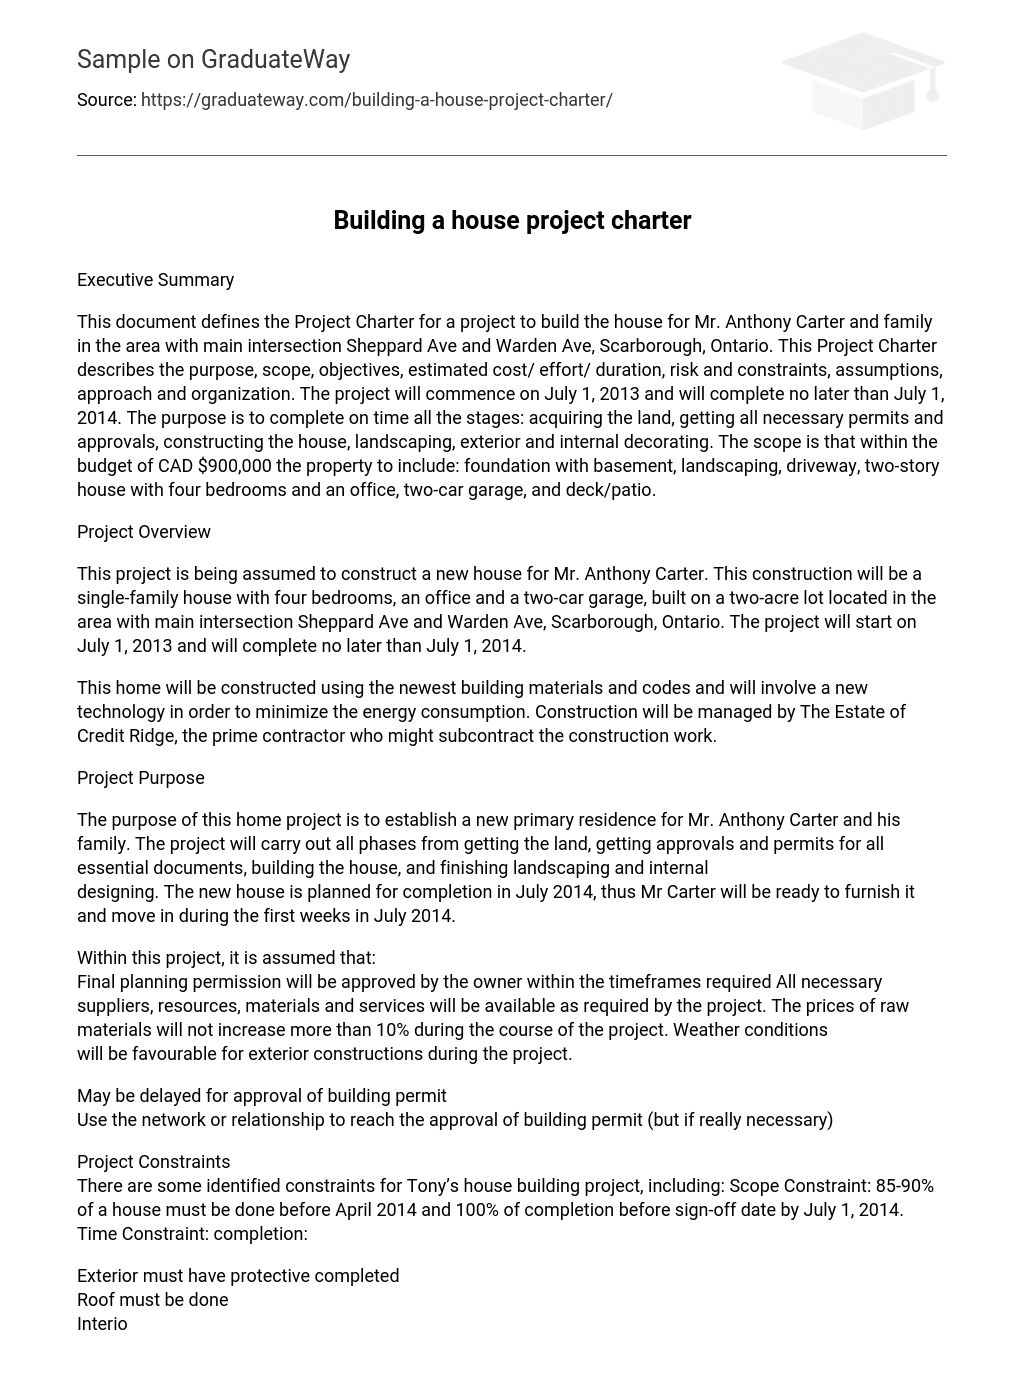 Building a house project charter